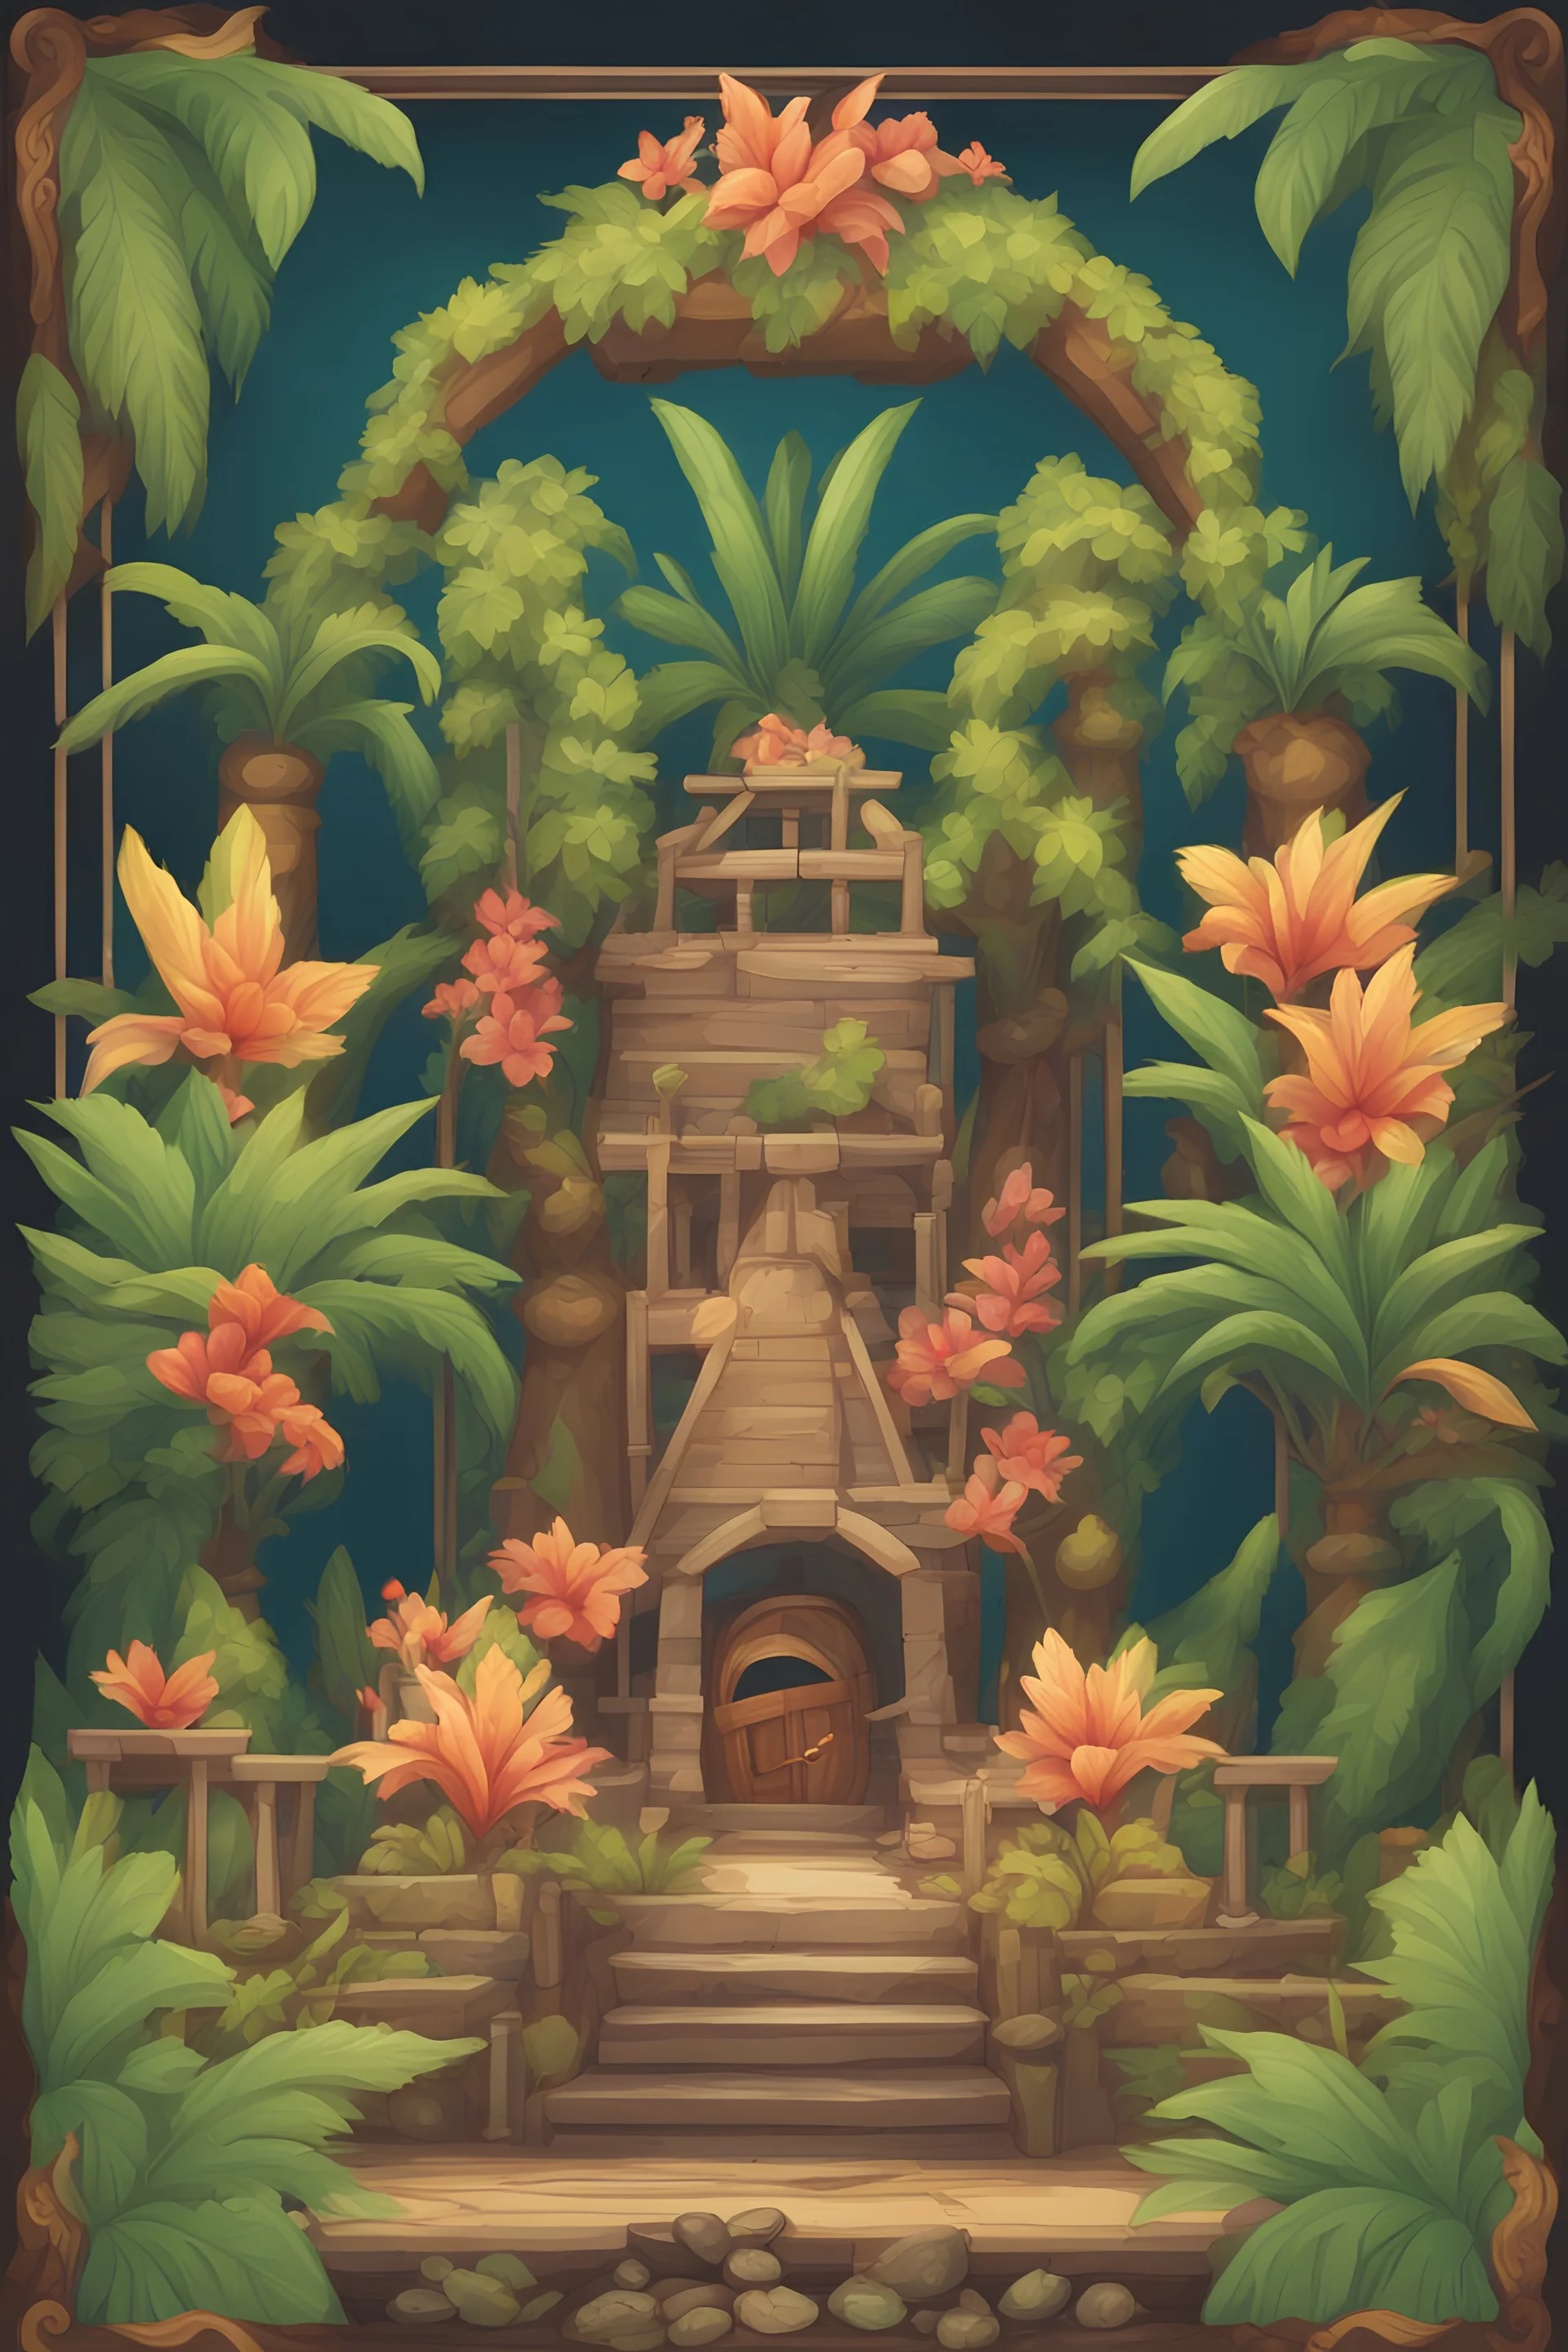 The external frame of the back side of a card for events in a board game. tropical fantasy cartoon style.